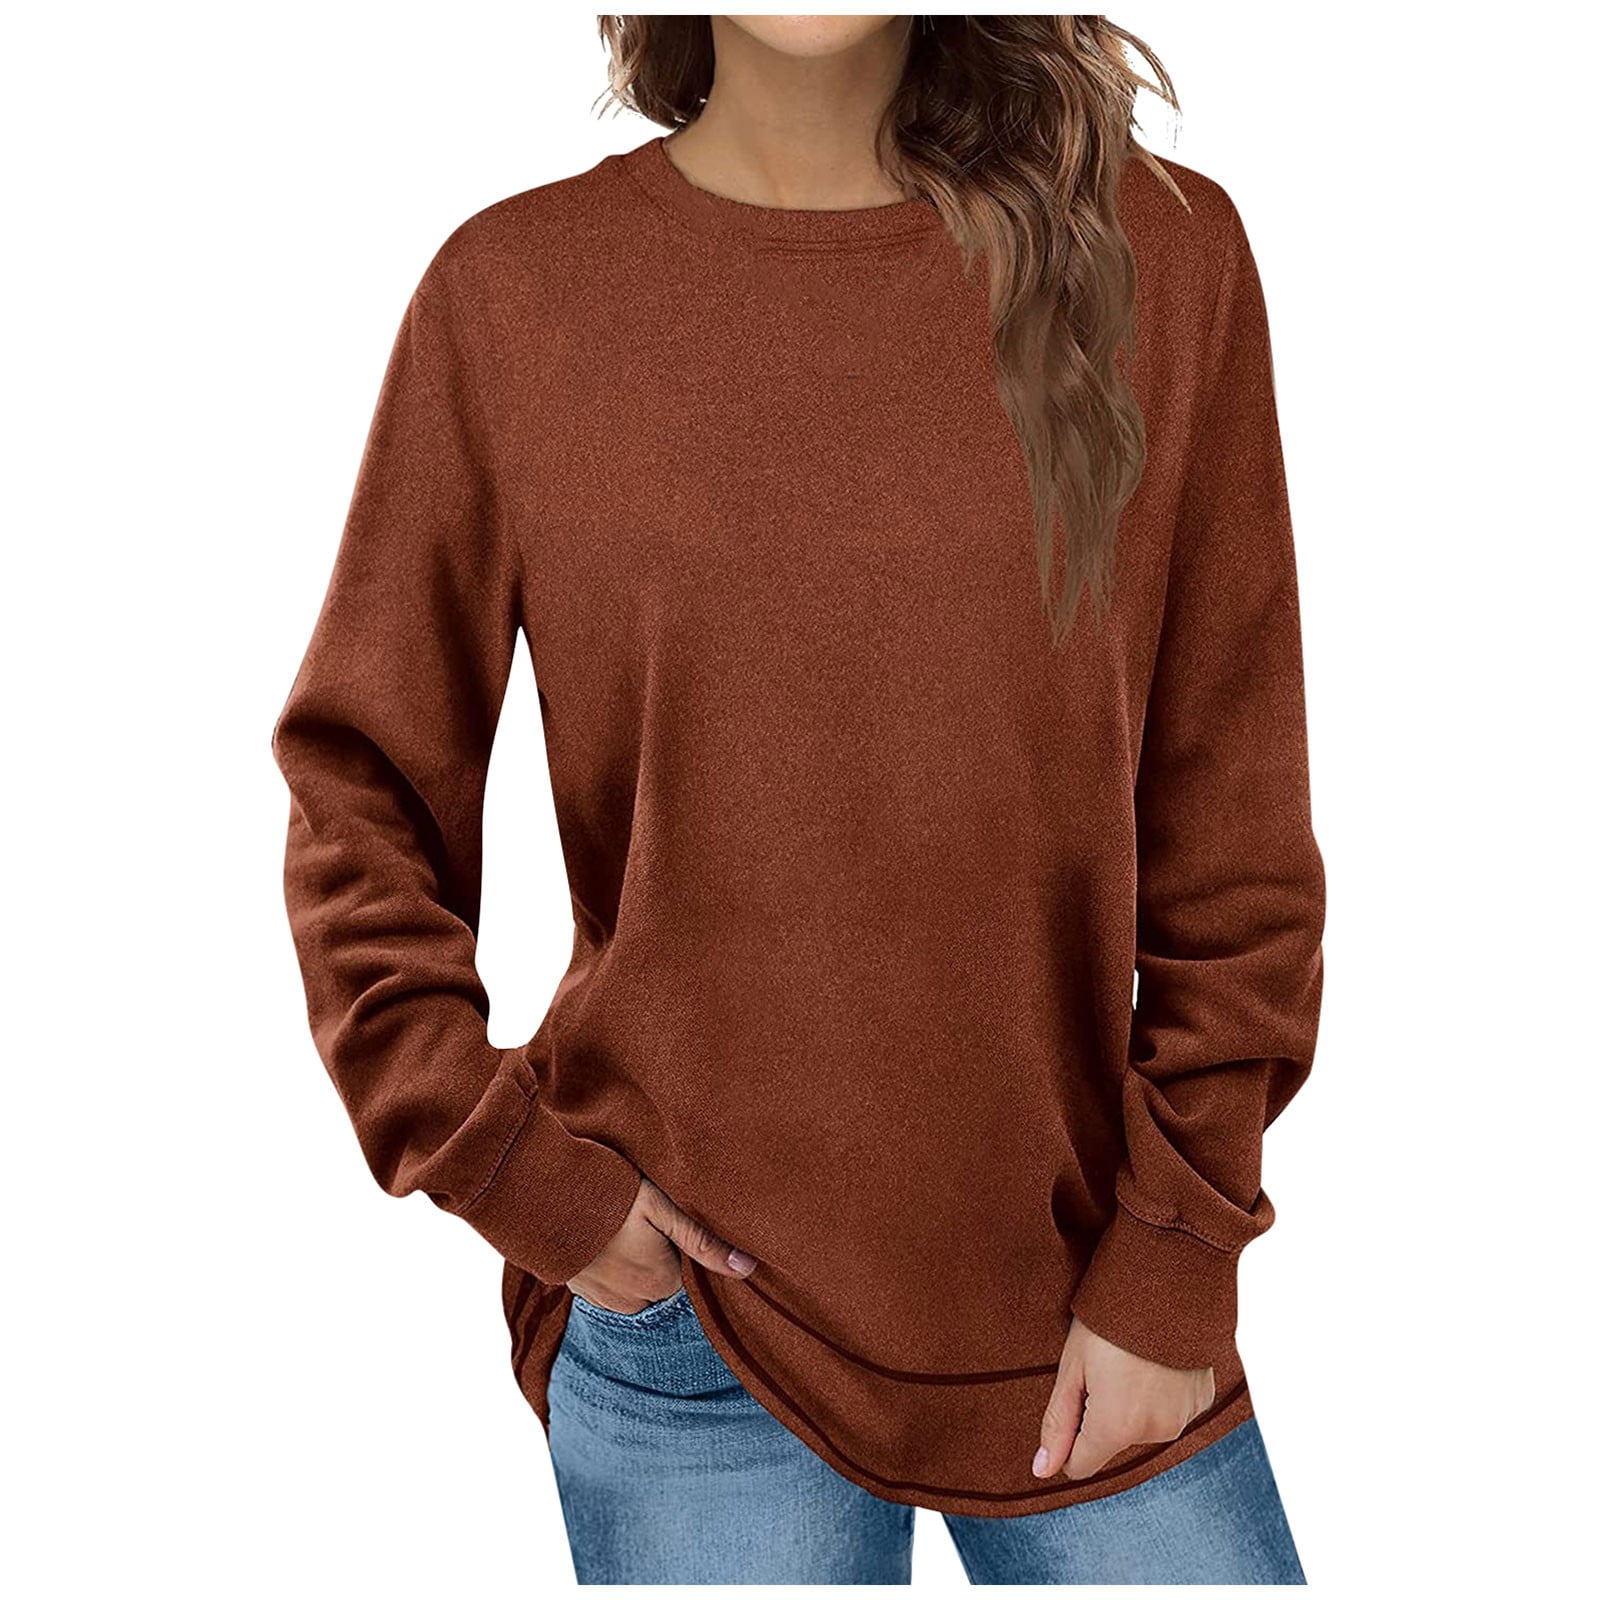 Sweatshirts for Women Casual Crewneck Long Sleeve Solid Color Shirts Soft  Lightweight Tunic Loose Tops for Leggings 